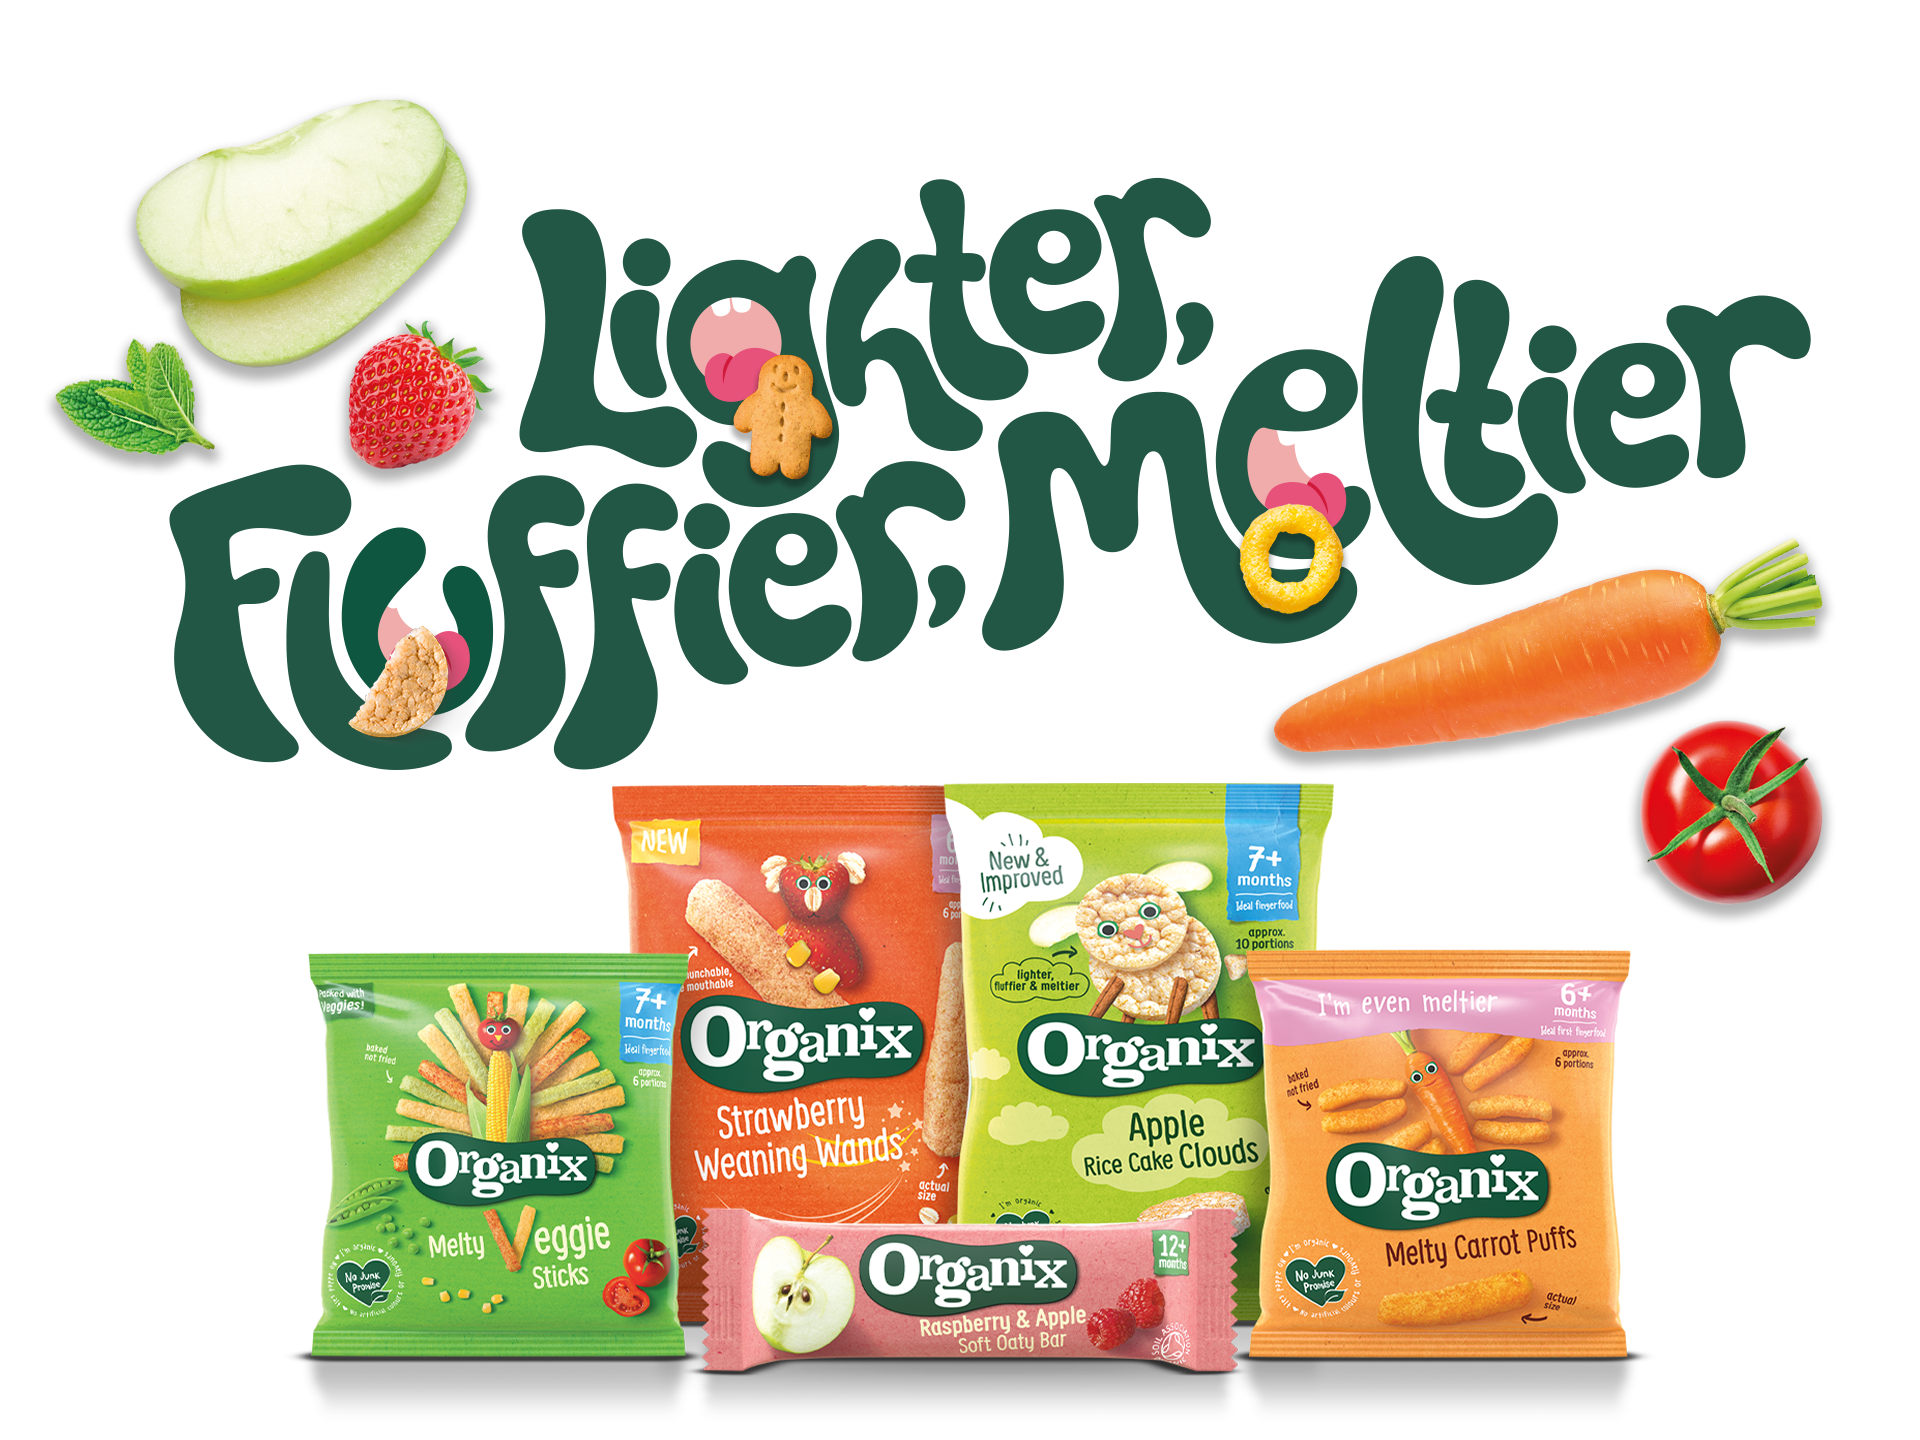 Organix snacks packs in a group surrounded by vegetables and fruit